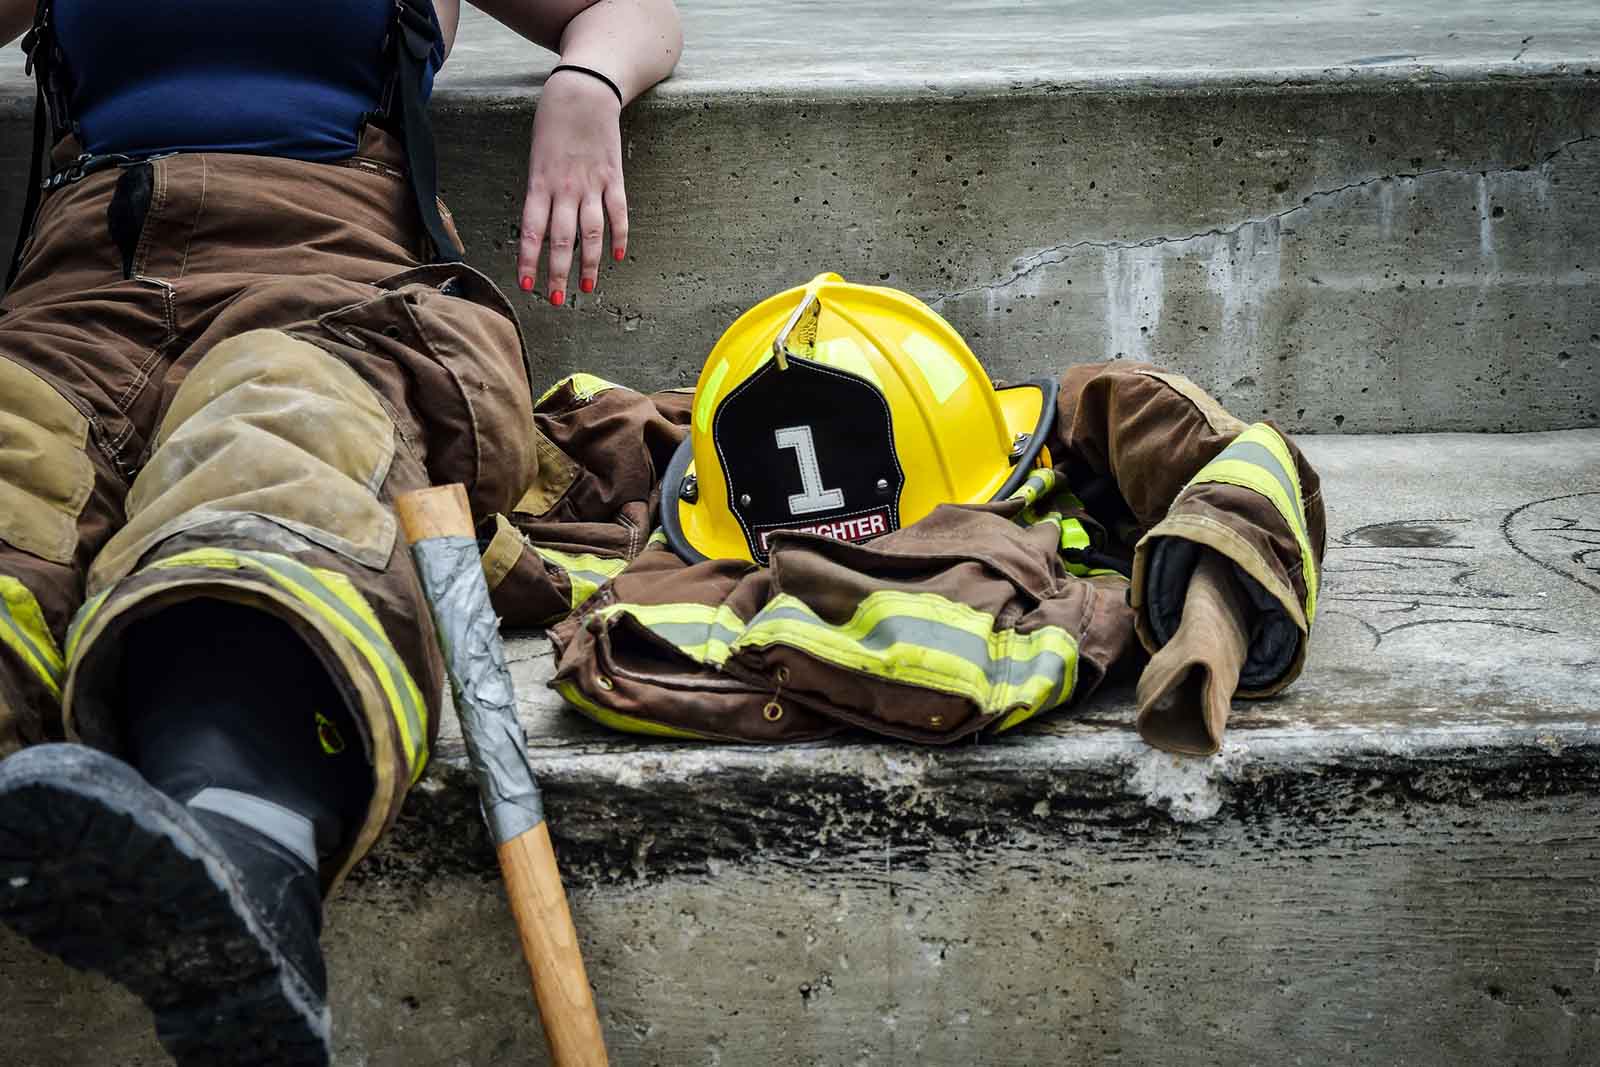 Firefighter sitting down